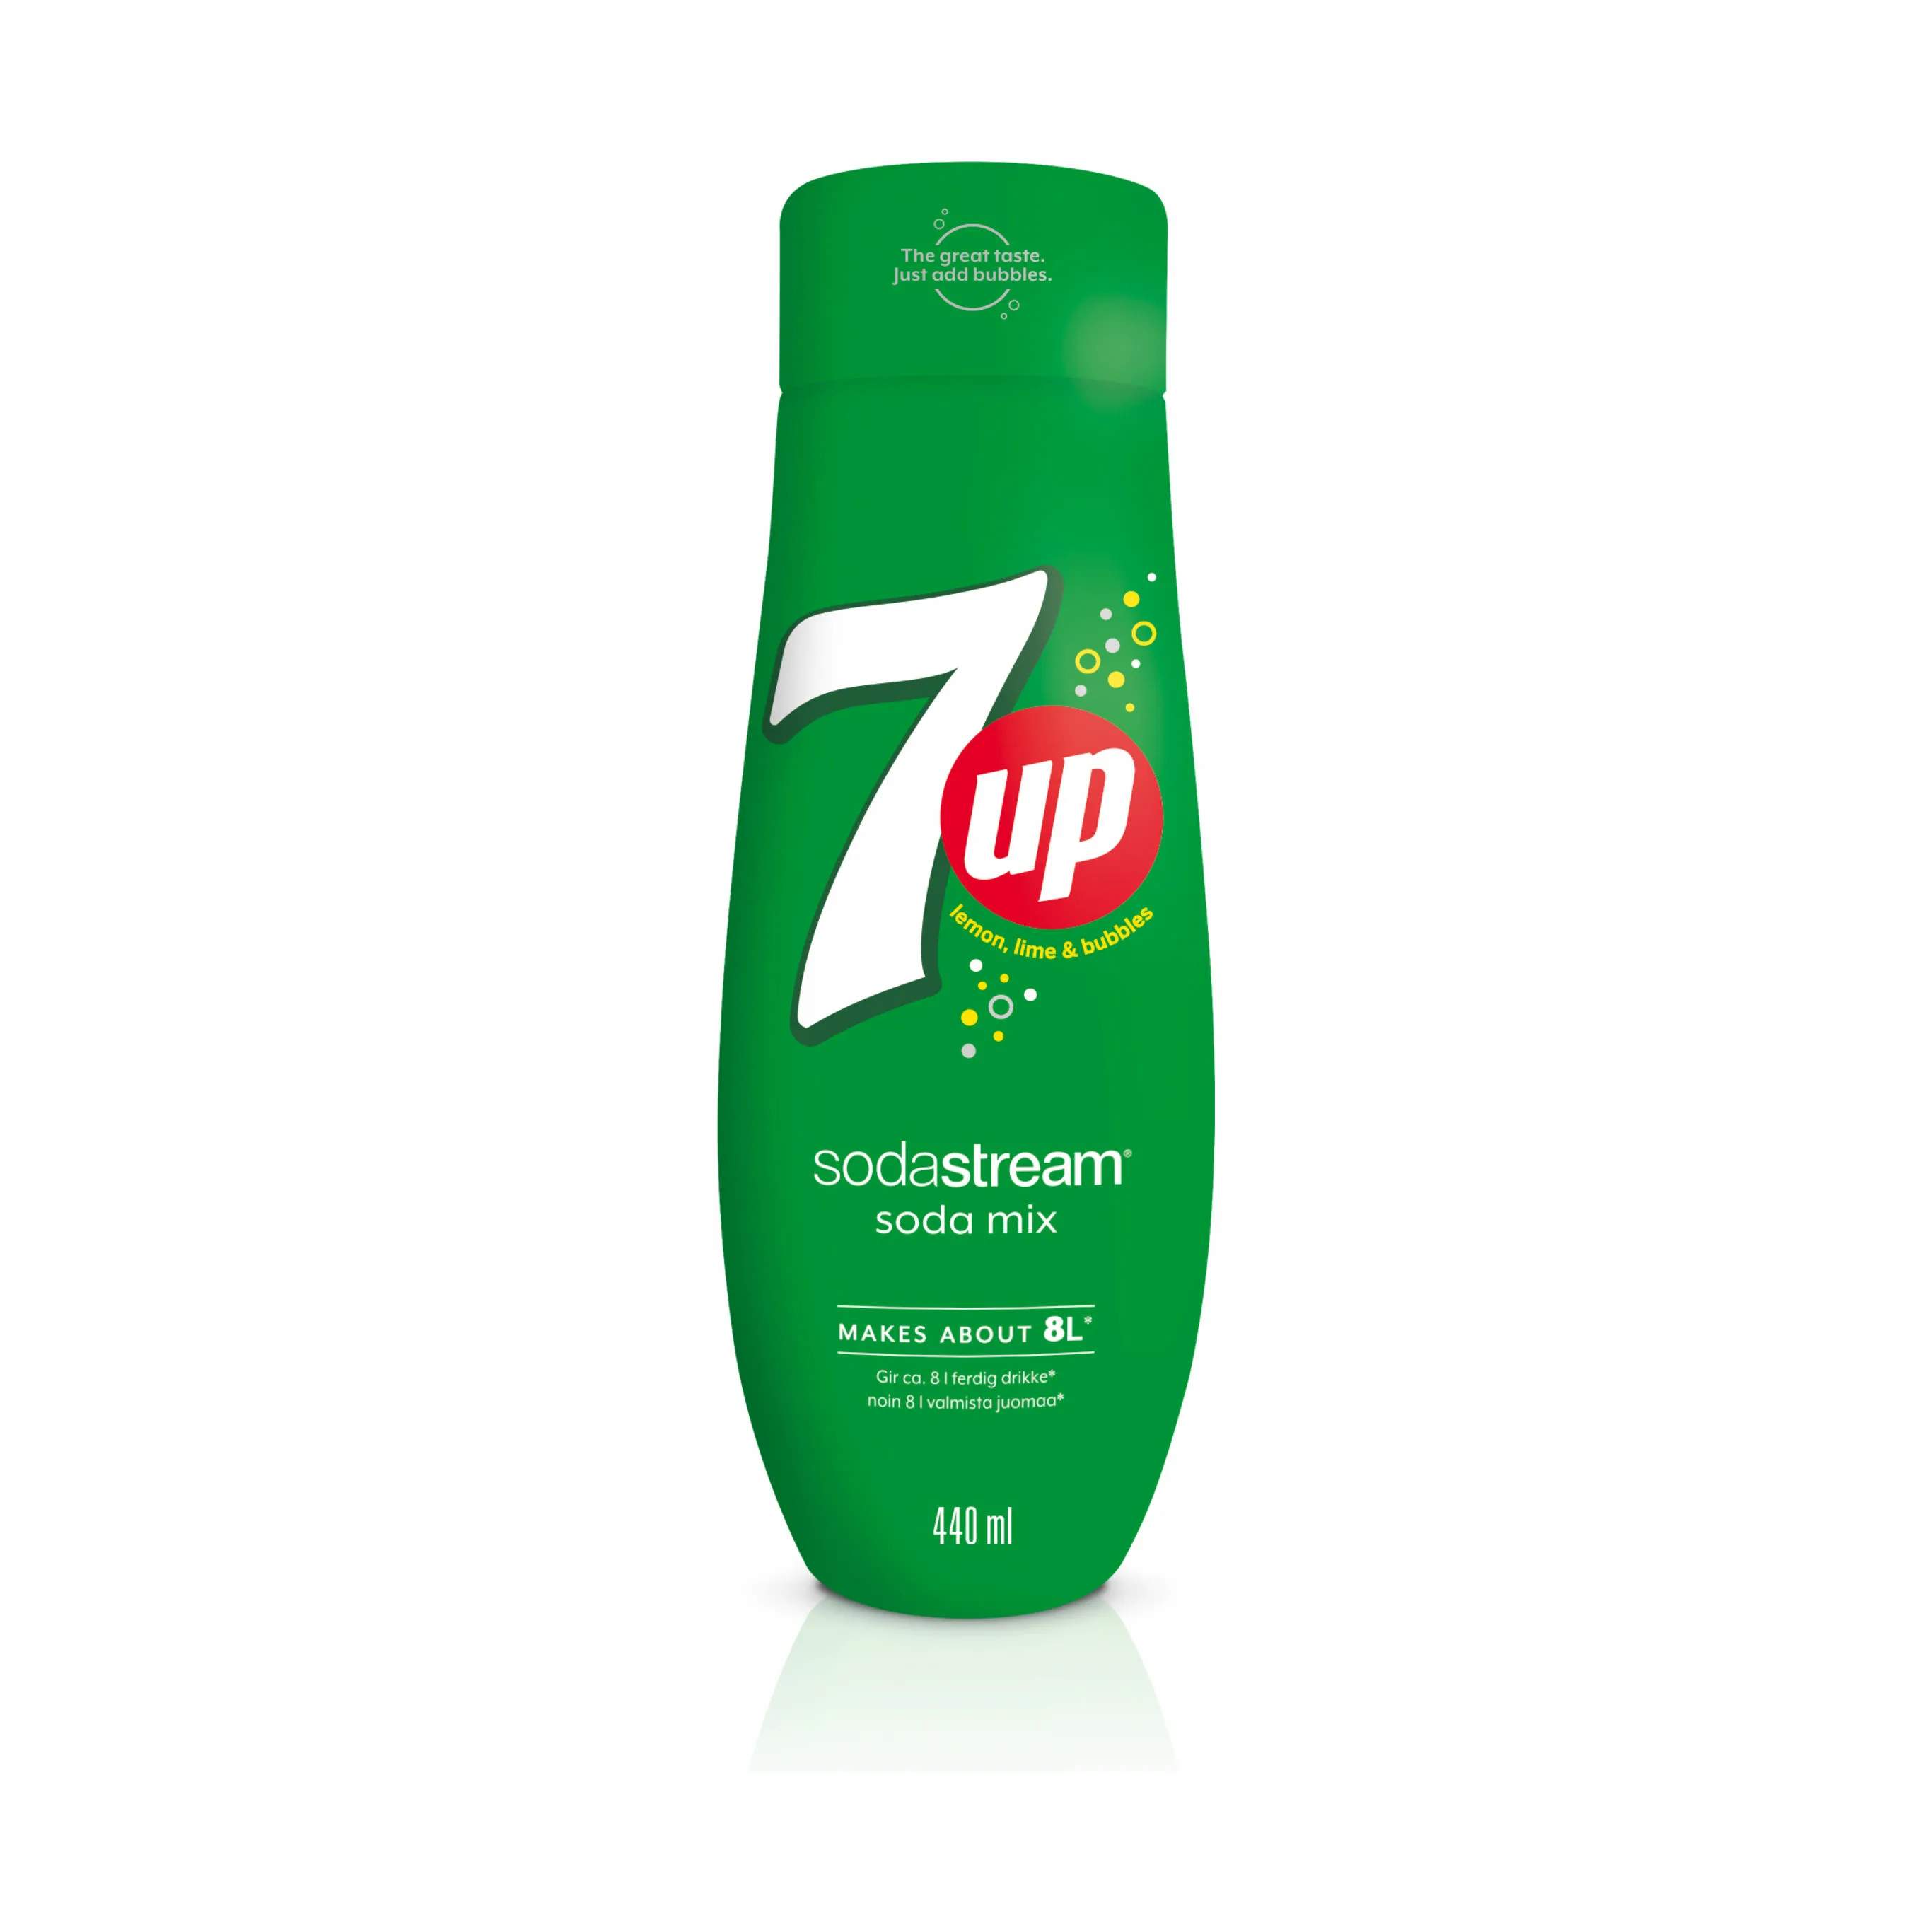 SodaStream smagskoncentrater Sirup - 7up